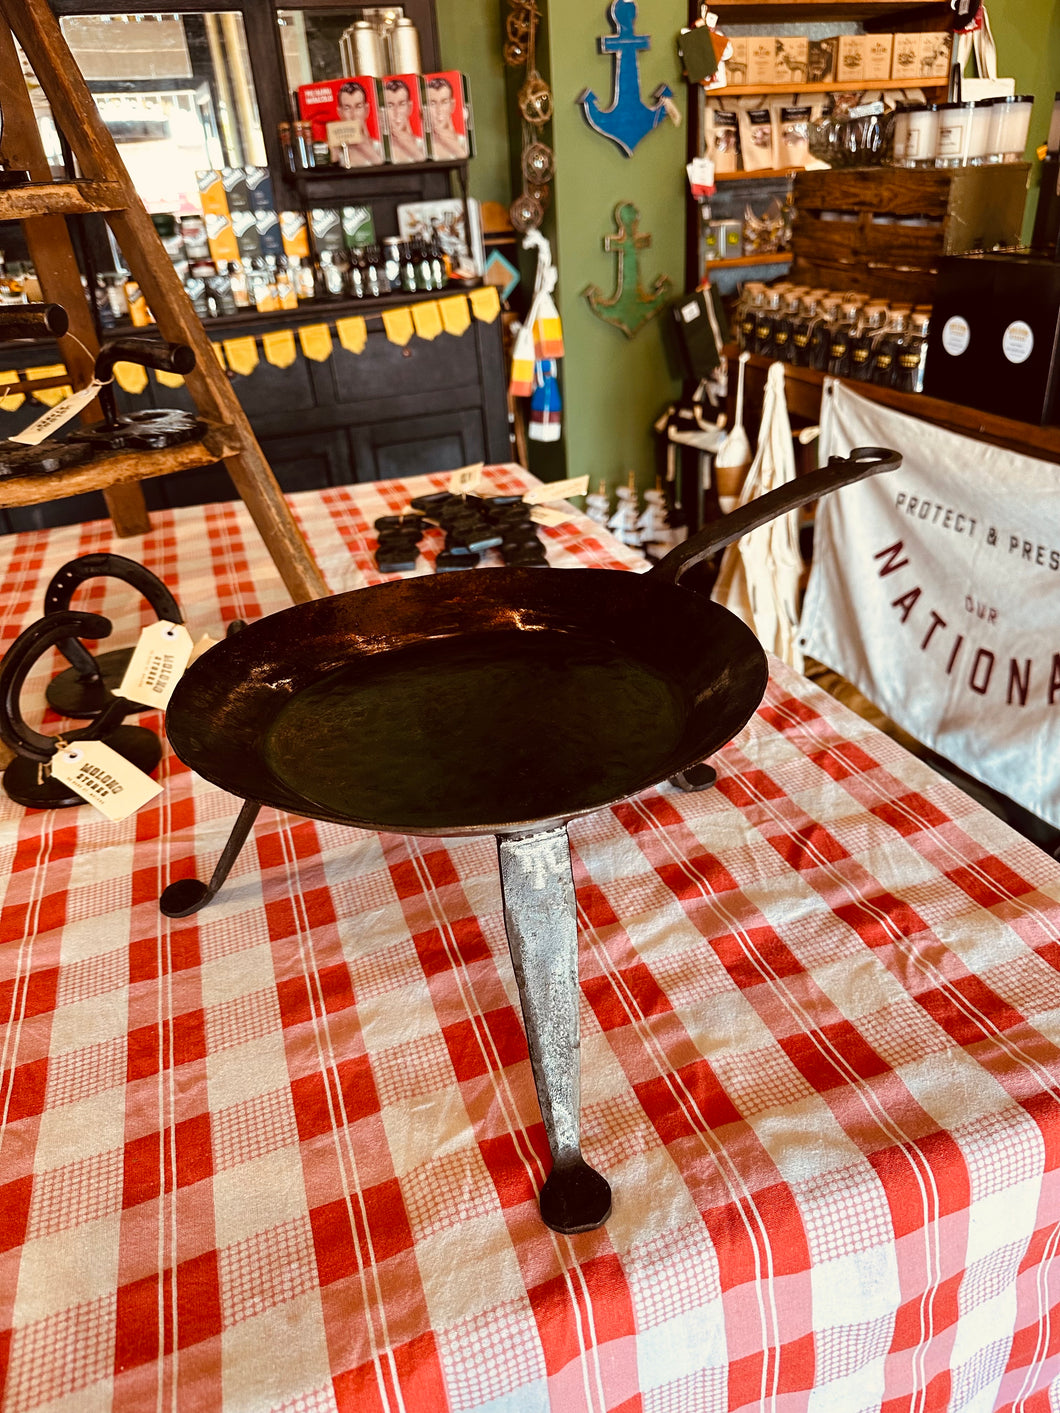 Cowboy Fry Pan on Stand